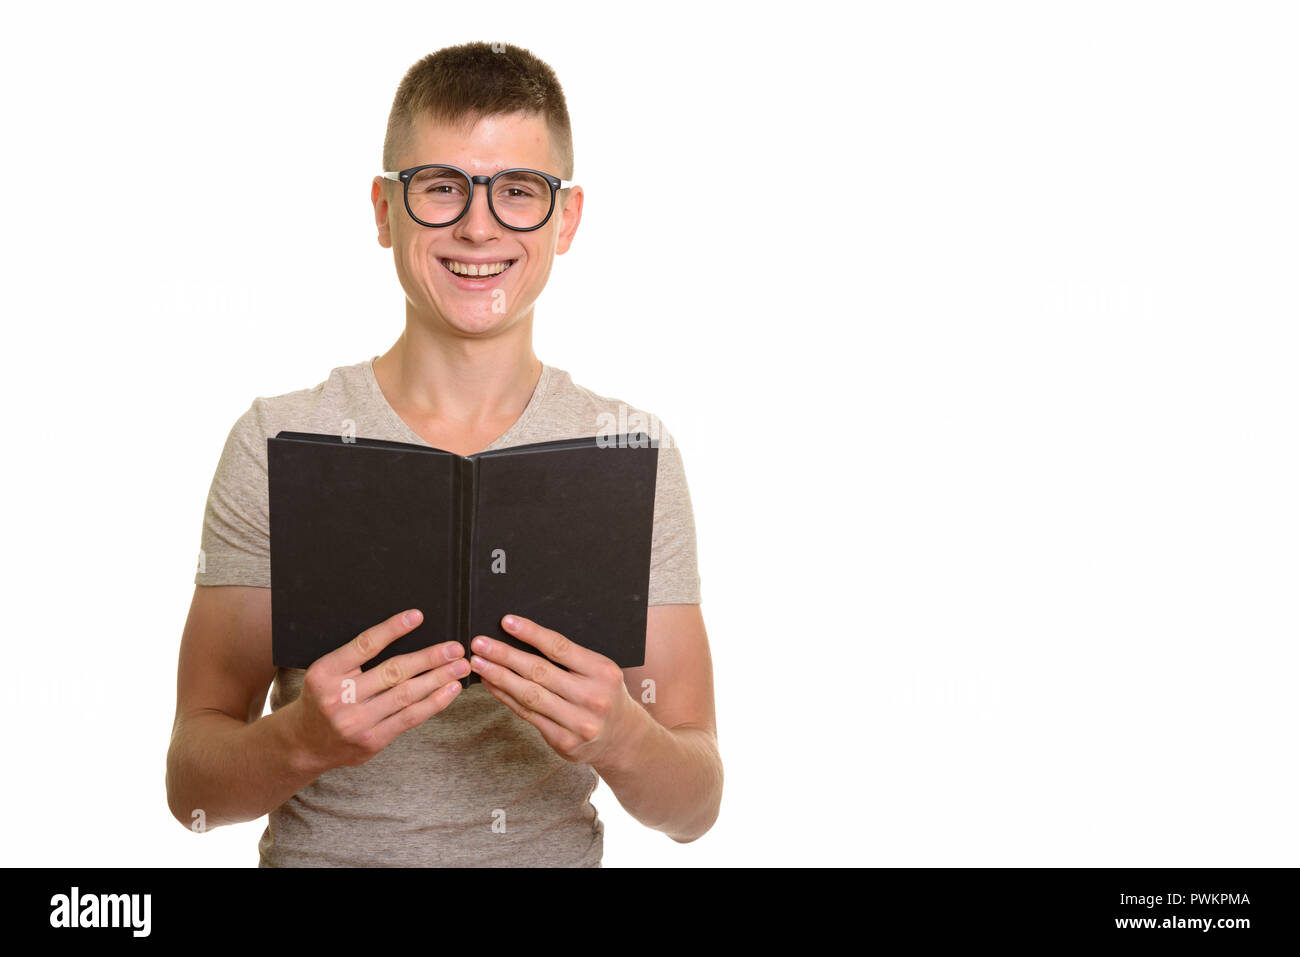 Young happy Caucasian man smiling and holding book Stock Photo